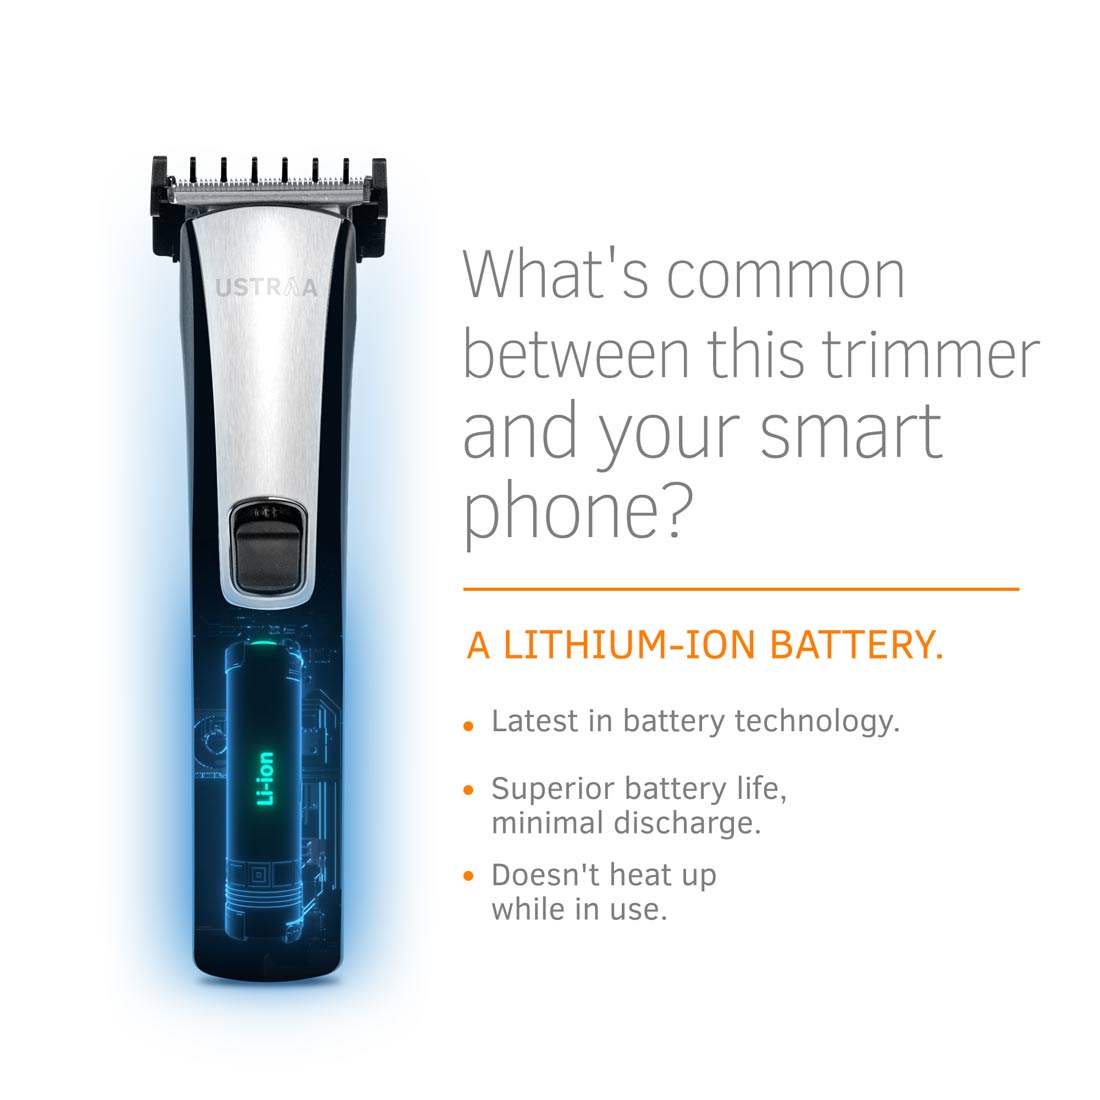 cordless trimmer meaning in telugu